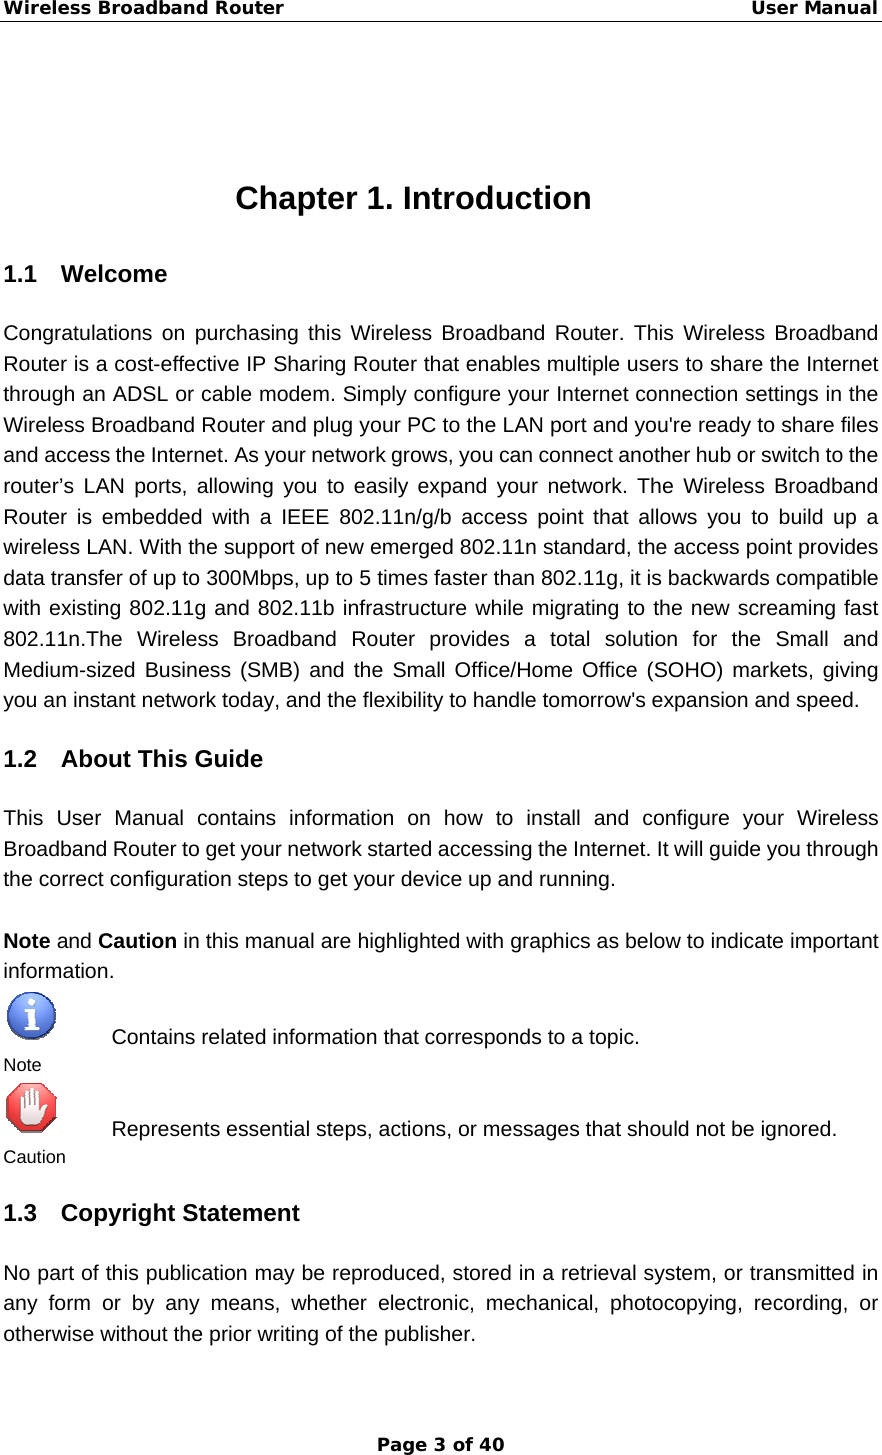 Wireless Broadband Router                                                   User Manual Page 3 of 40  Chapter 1. Introduction 1.1 Welcome Congratulations on purchasing this Wireless Broadband Router. This Wireless Broadband Router is a cost-effective IP Sharing Router that enables multiple users to share the Internet through an ADSL or cable modem. Simply configure your Internet connection settings in the Wireless Broadband Router and plug your PC to the LAN port and you&apos;re ready to share files and access the Internet. As your network grows, you can connect another hub or switch to the router’s LAN ports, allowing you to easily expand your network. The Wireless Broadband Router is embedded with a IEEE 802.11n/g/b access point that allows you to build up a wireless LAN. With the support of new emerged 802.11n standard, the access point provides data transfer of up to 300Mbps, up to 5 times faster than 802.11g, it is backwards compatible with existing 802.11g and 802.11b infrastructure while migrating to the new screaming fast 802.11n.The Wireless Broadband Router provides a total solution for the Small and Medium-sized Business (SMB) and the Small Office/Home Office (SOHO) markets, giving you an instant network today, and the flexibility to handle tomorrow&apos;s expansion and speed. 1.2 About This Guide This User Manual contains information on how to install and configure your Wireless Broadband Router to get your network started accessing the Internet. It will guide you through the correct configuration steps to get your device up and running.  Note and Caution in this manual are highlighted with graphics as below to indicate important information.      Contains related information that corresponds to a topic. Note           Represents essential steps, actions, or messages that should not be ignored. Caution 1.3 Copyright Statement No part of this publication may be reproduced, stored in a retrieval system, or transmitted in any form or by any means, whether electronic, mechanical, photocopying, recording, or otherwise without the prior writing of the publisher. 